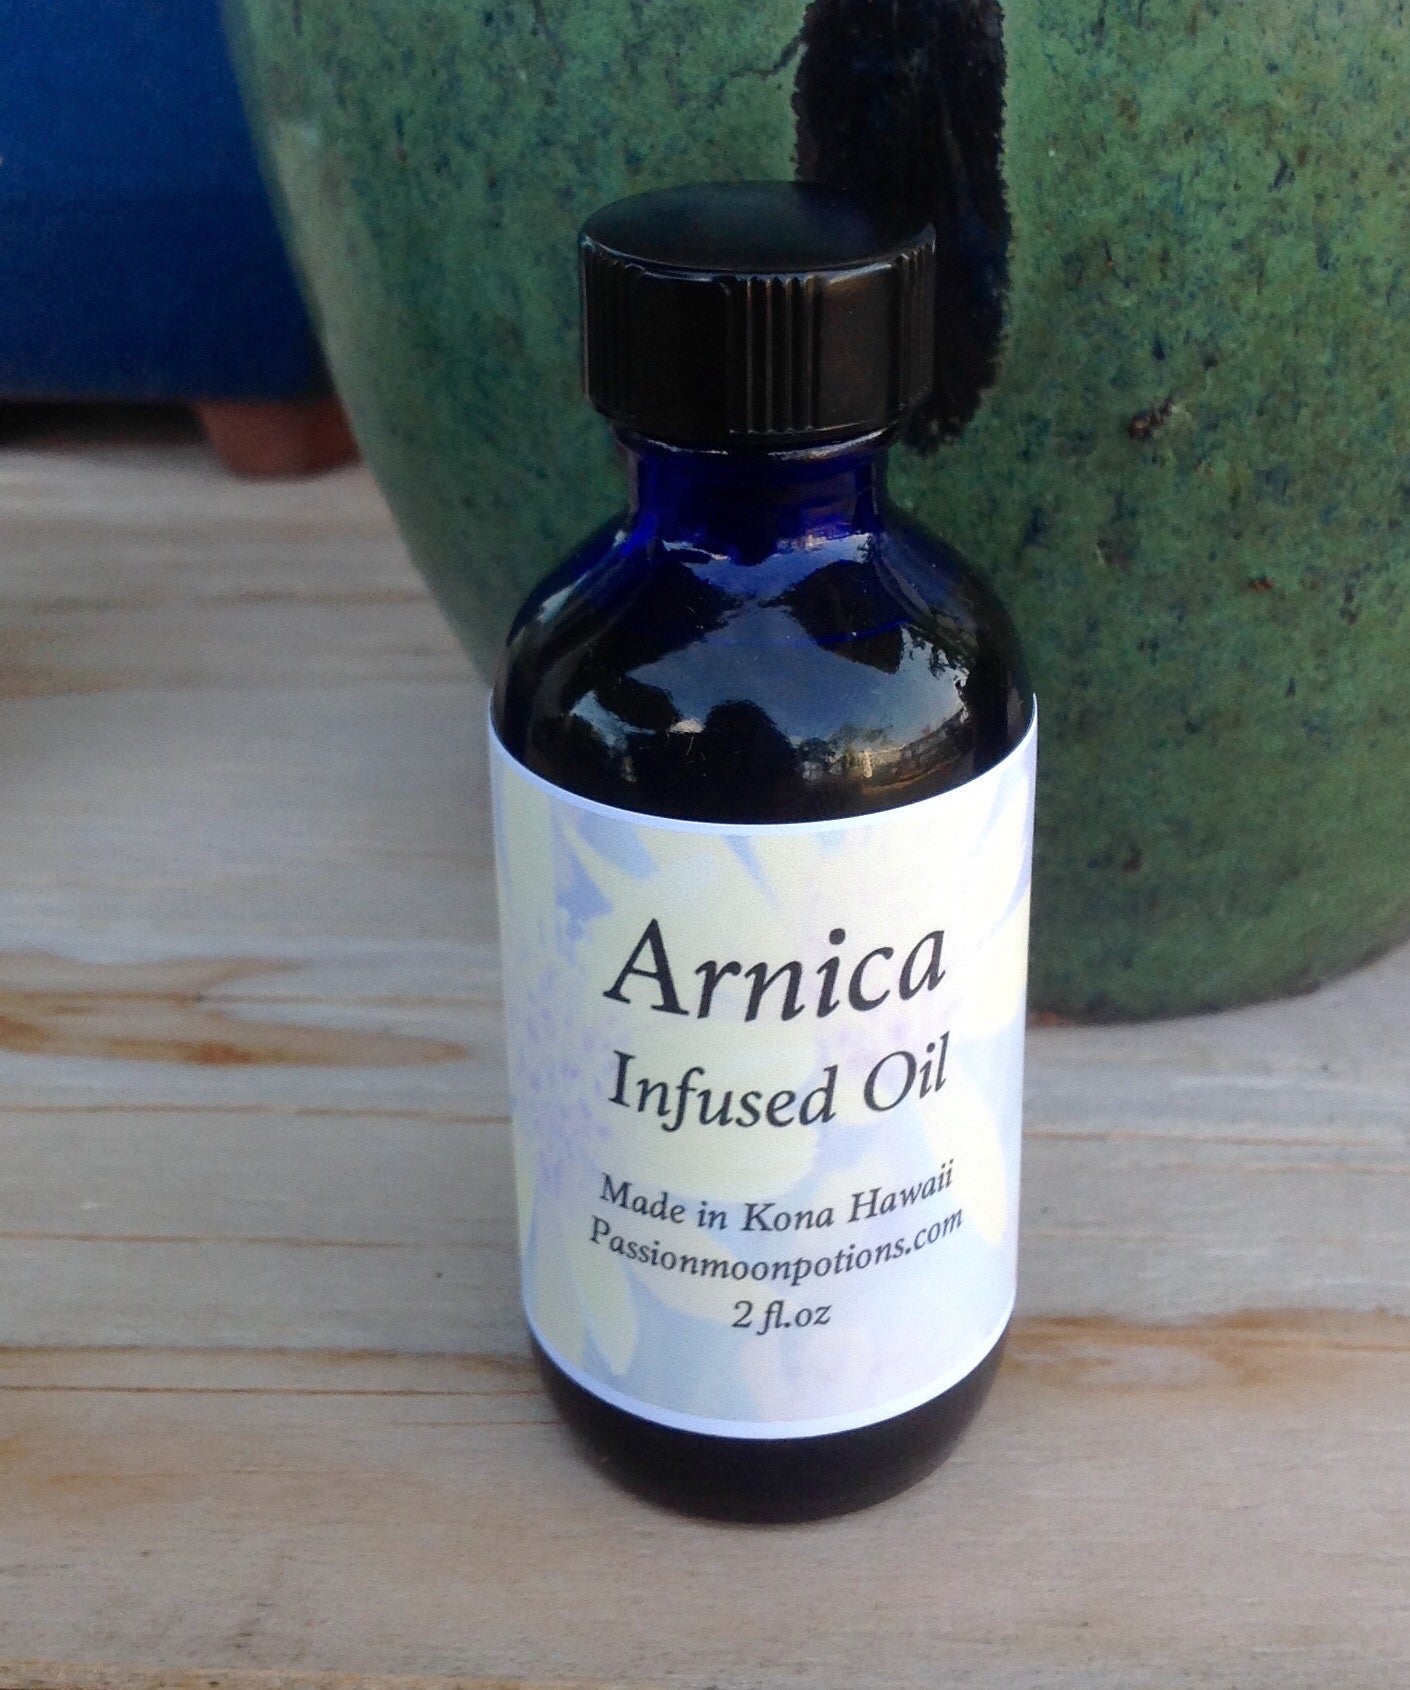 Arnica Infused Oil 2oz - Passion Moon Potions - 3